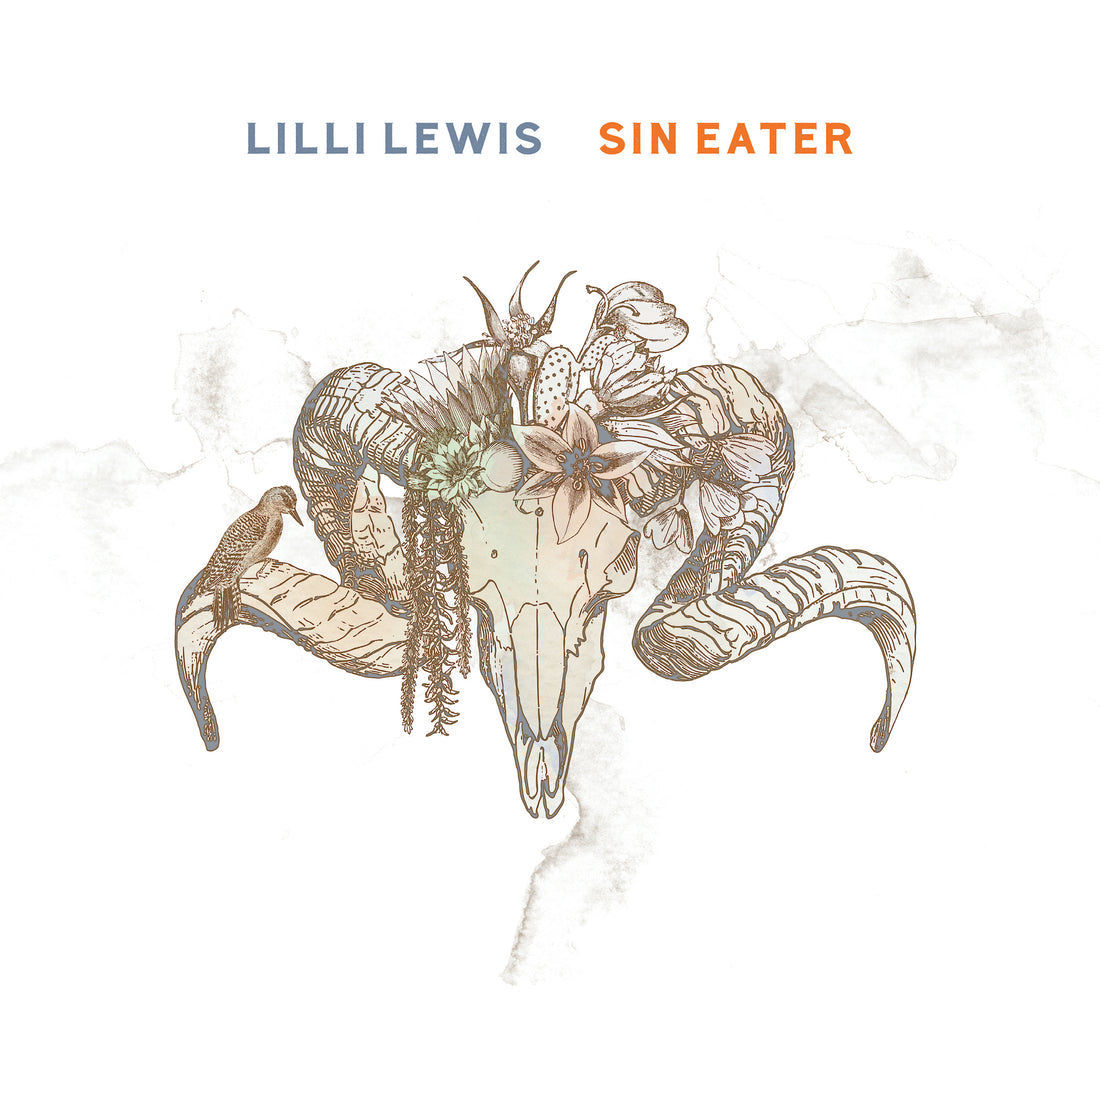 Lilli Lewis Releases "Sin Eater" as debut Righteous Babe Single